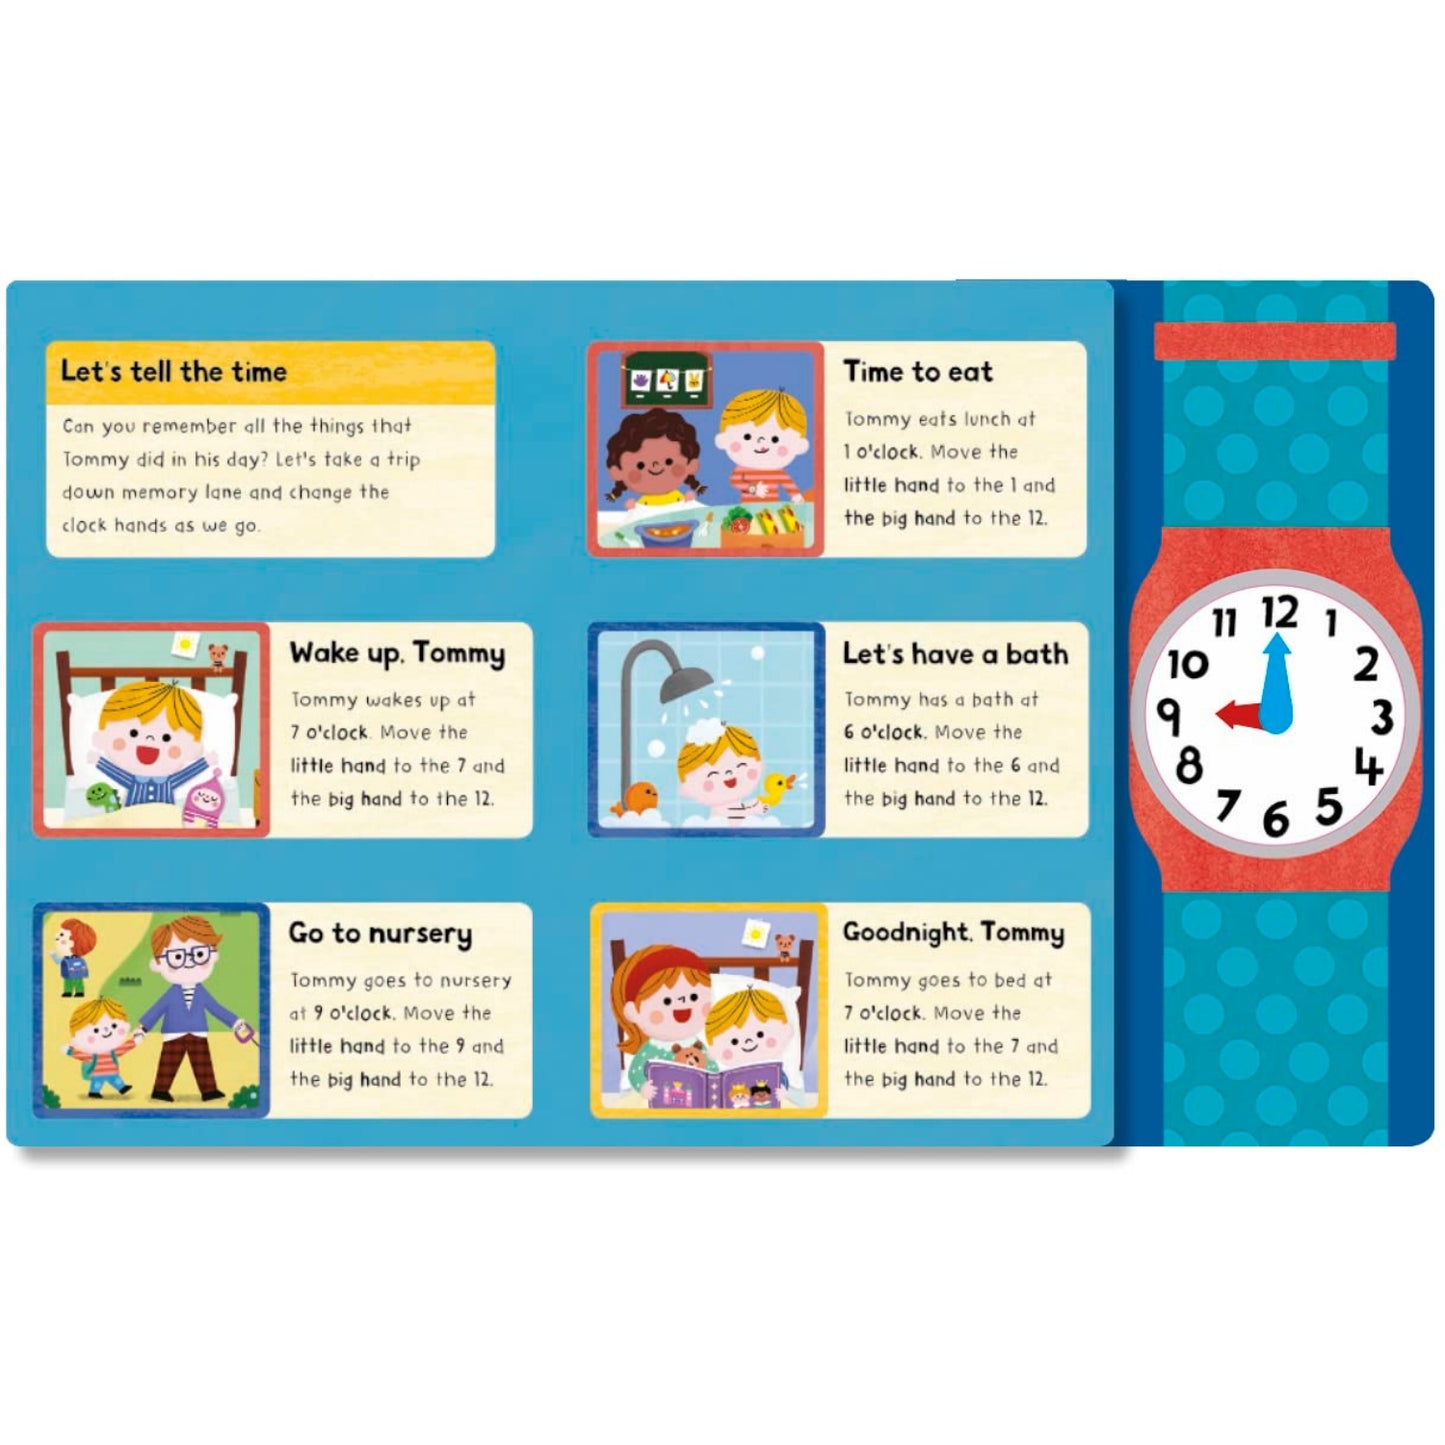 My First Clock Book: Learn to Tell the Time | Board Book | Children's Early Learning Book on Time